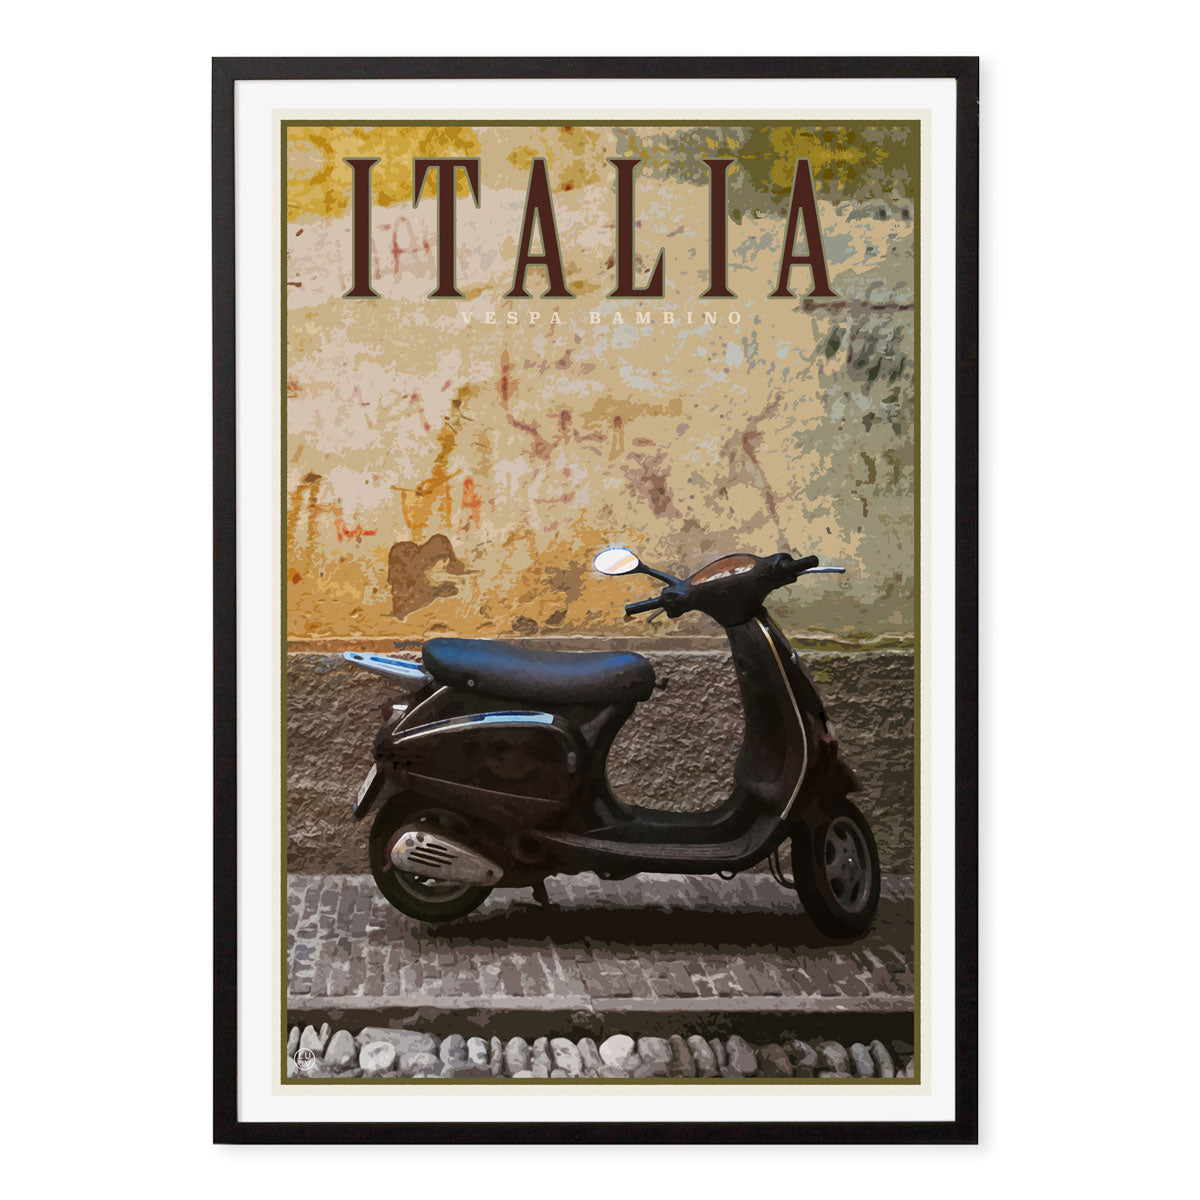 Vespa Italy retro vintage travel poster print in black frame by Places We Luv